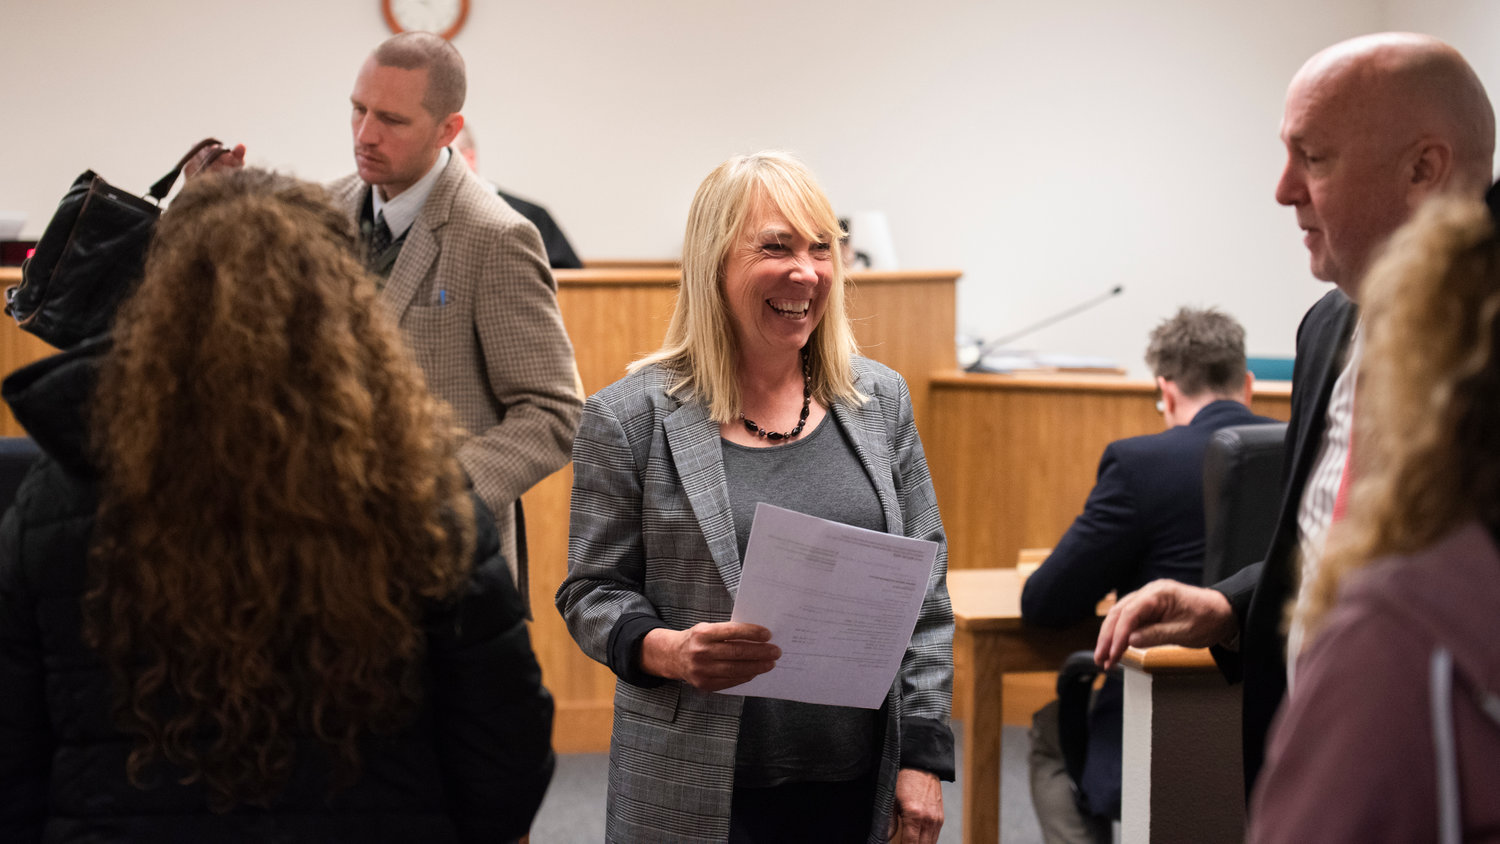 Laurel Khan, owner of Mackinaw's Restaurant and connected bar, Curious, in Chehalis, smiles as she is greeted following an appearance in Lewis County District Court Tuesday morning.